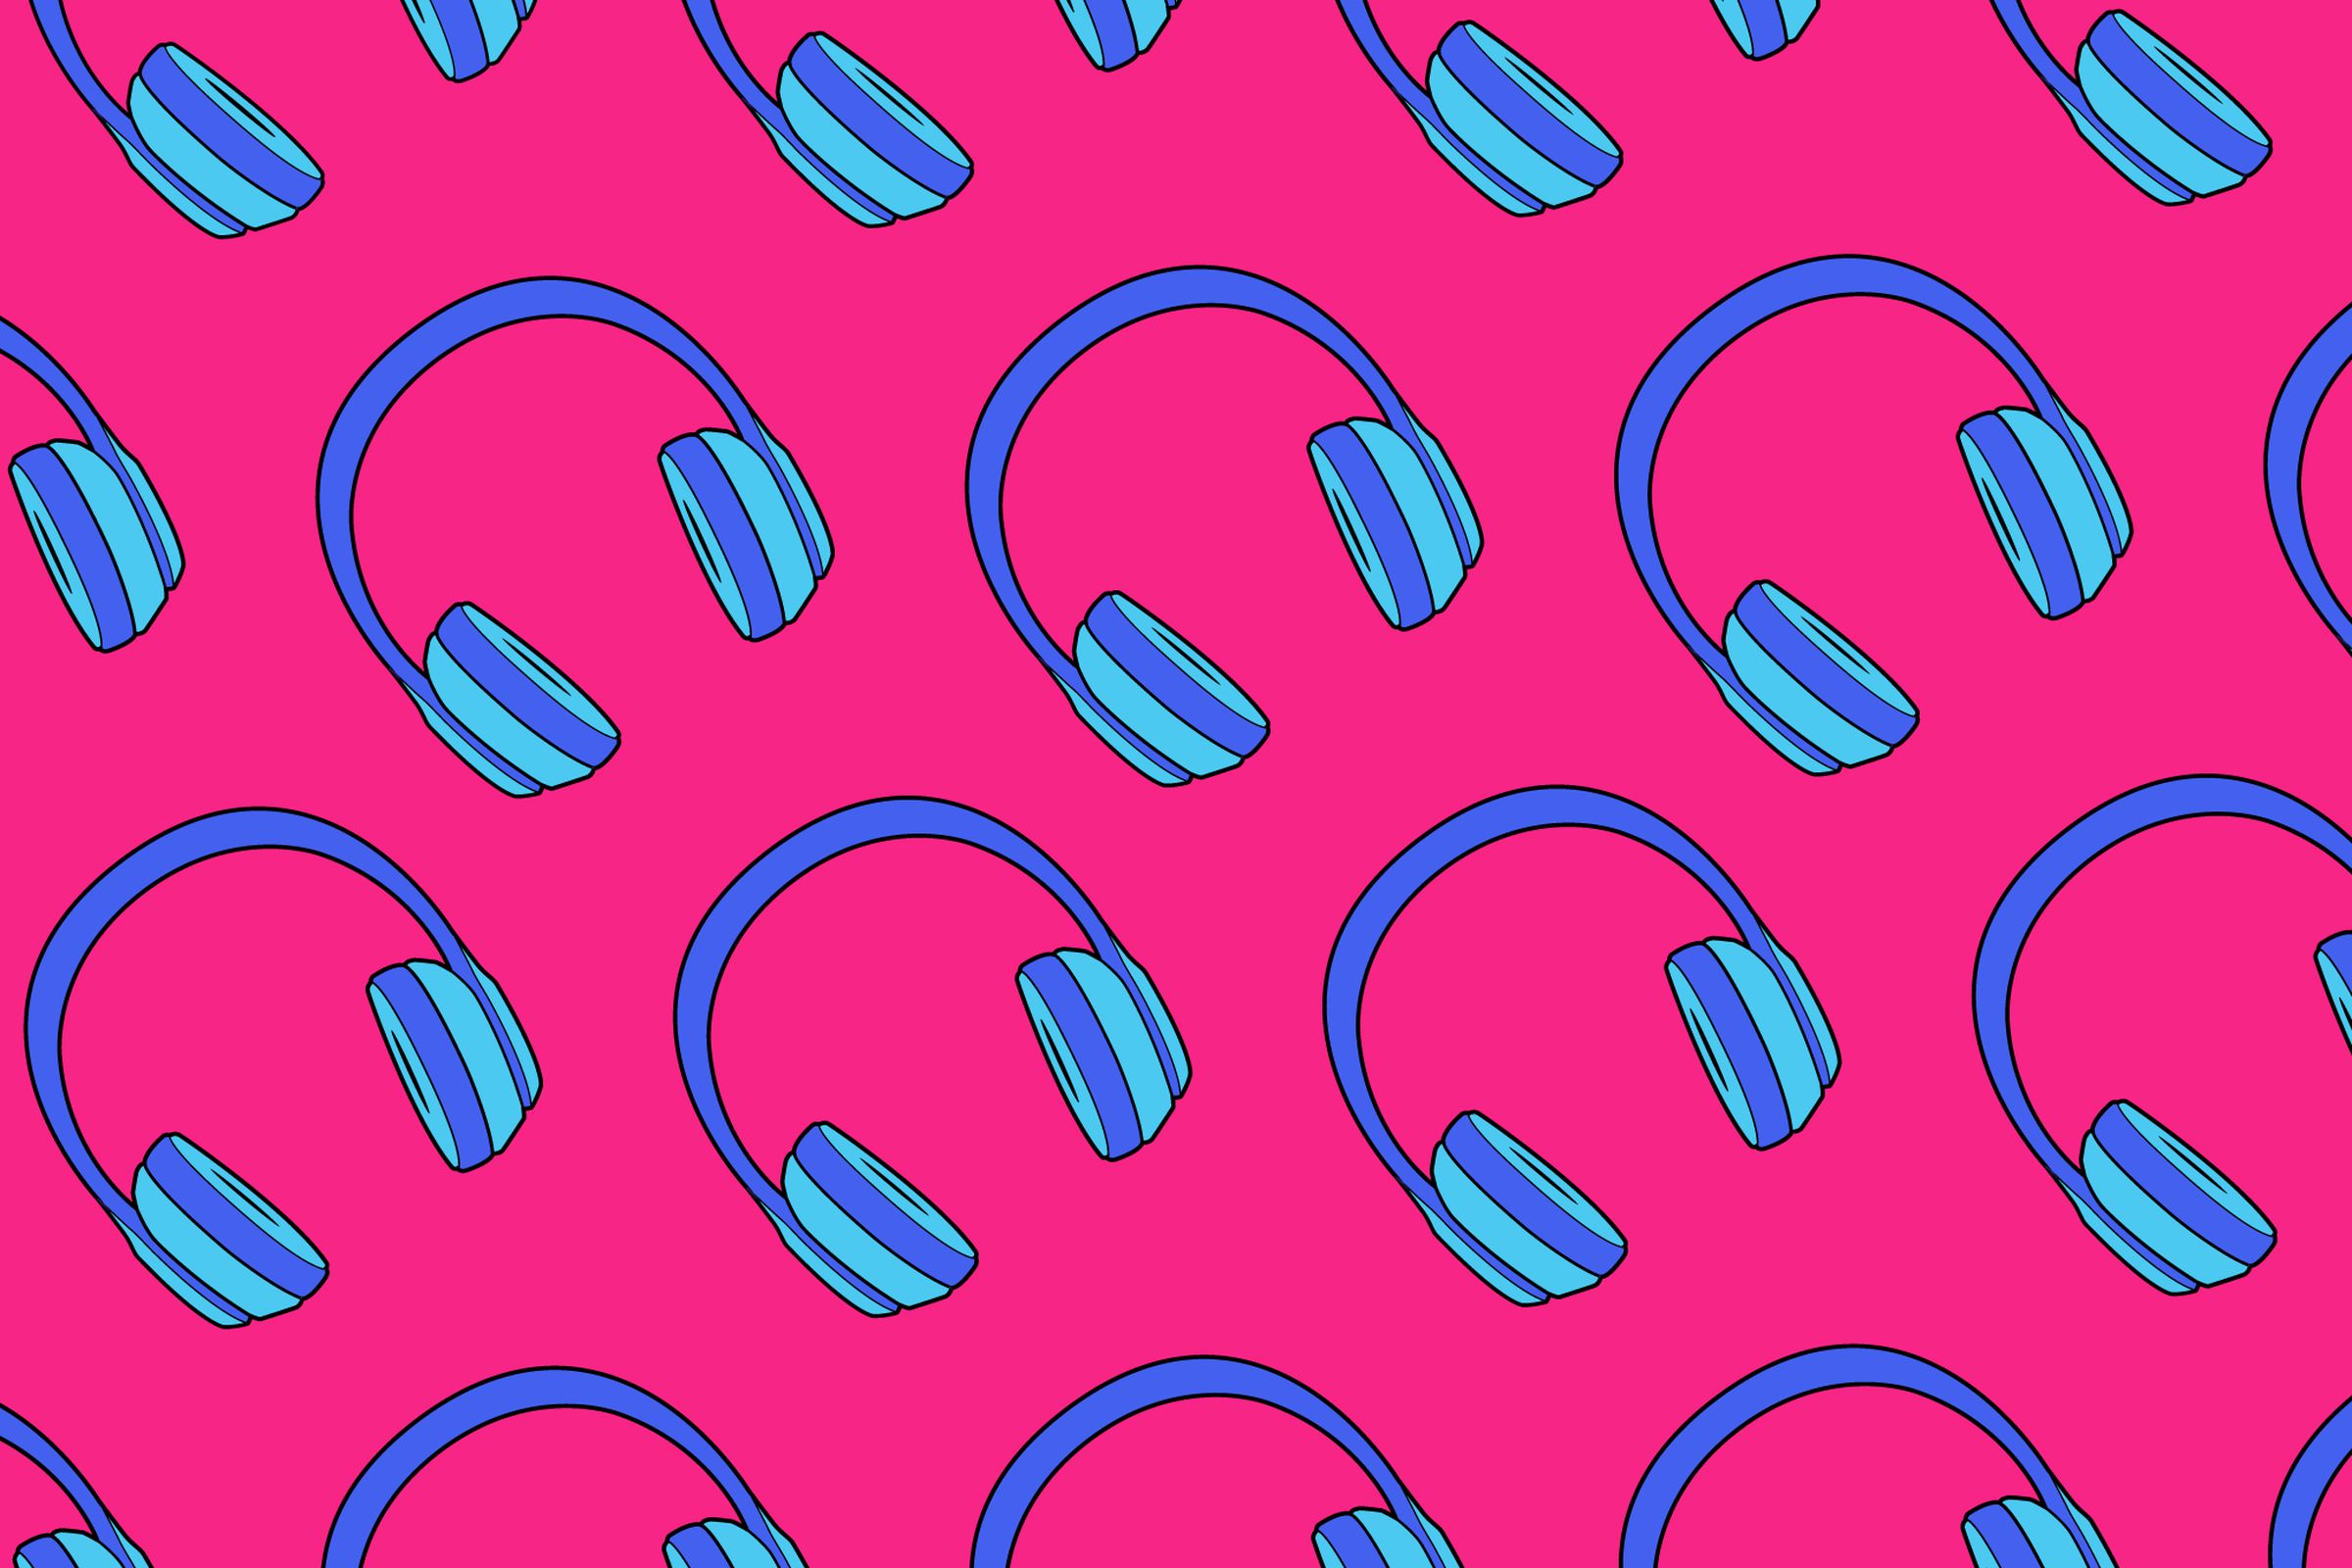 Rows of blue headphones floating diagonally against a pink background.